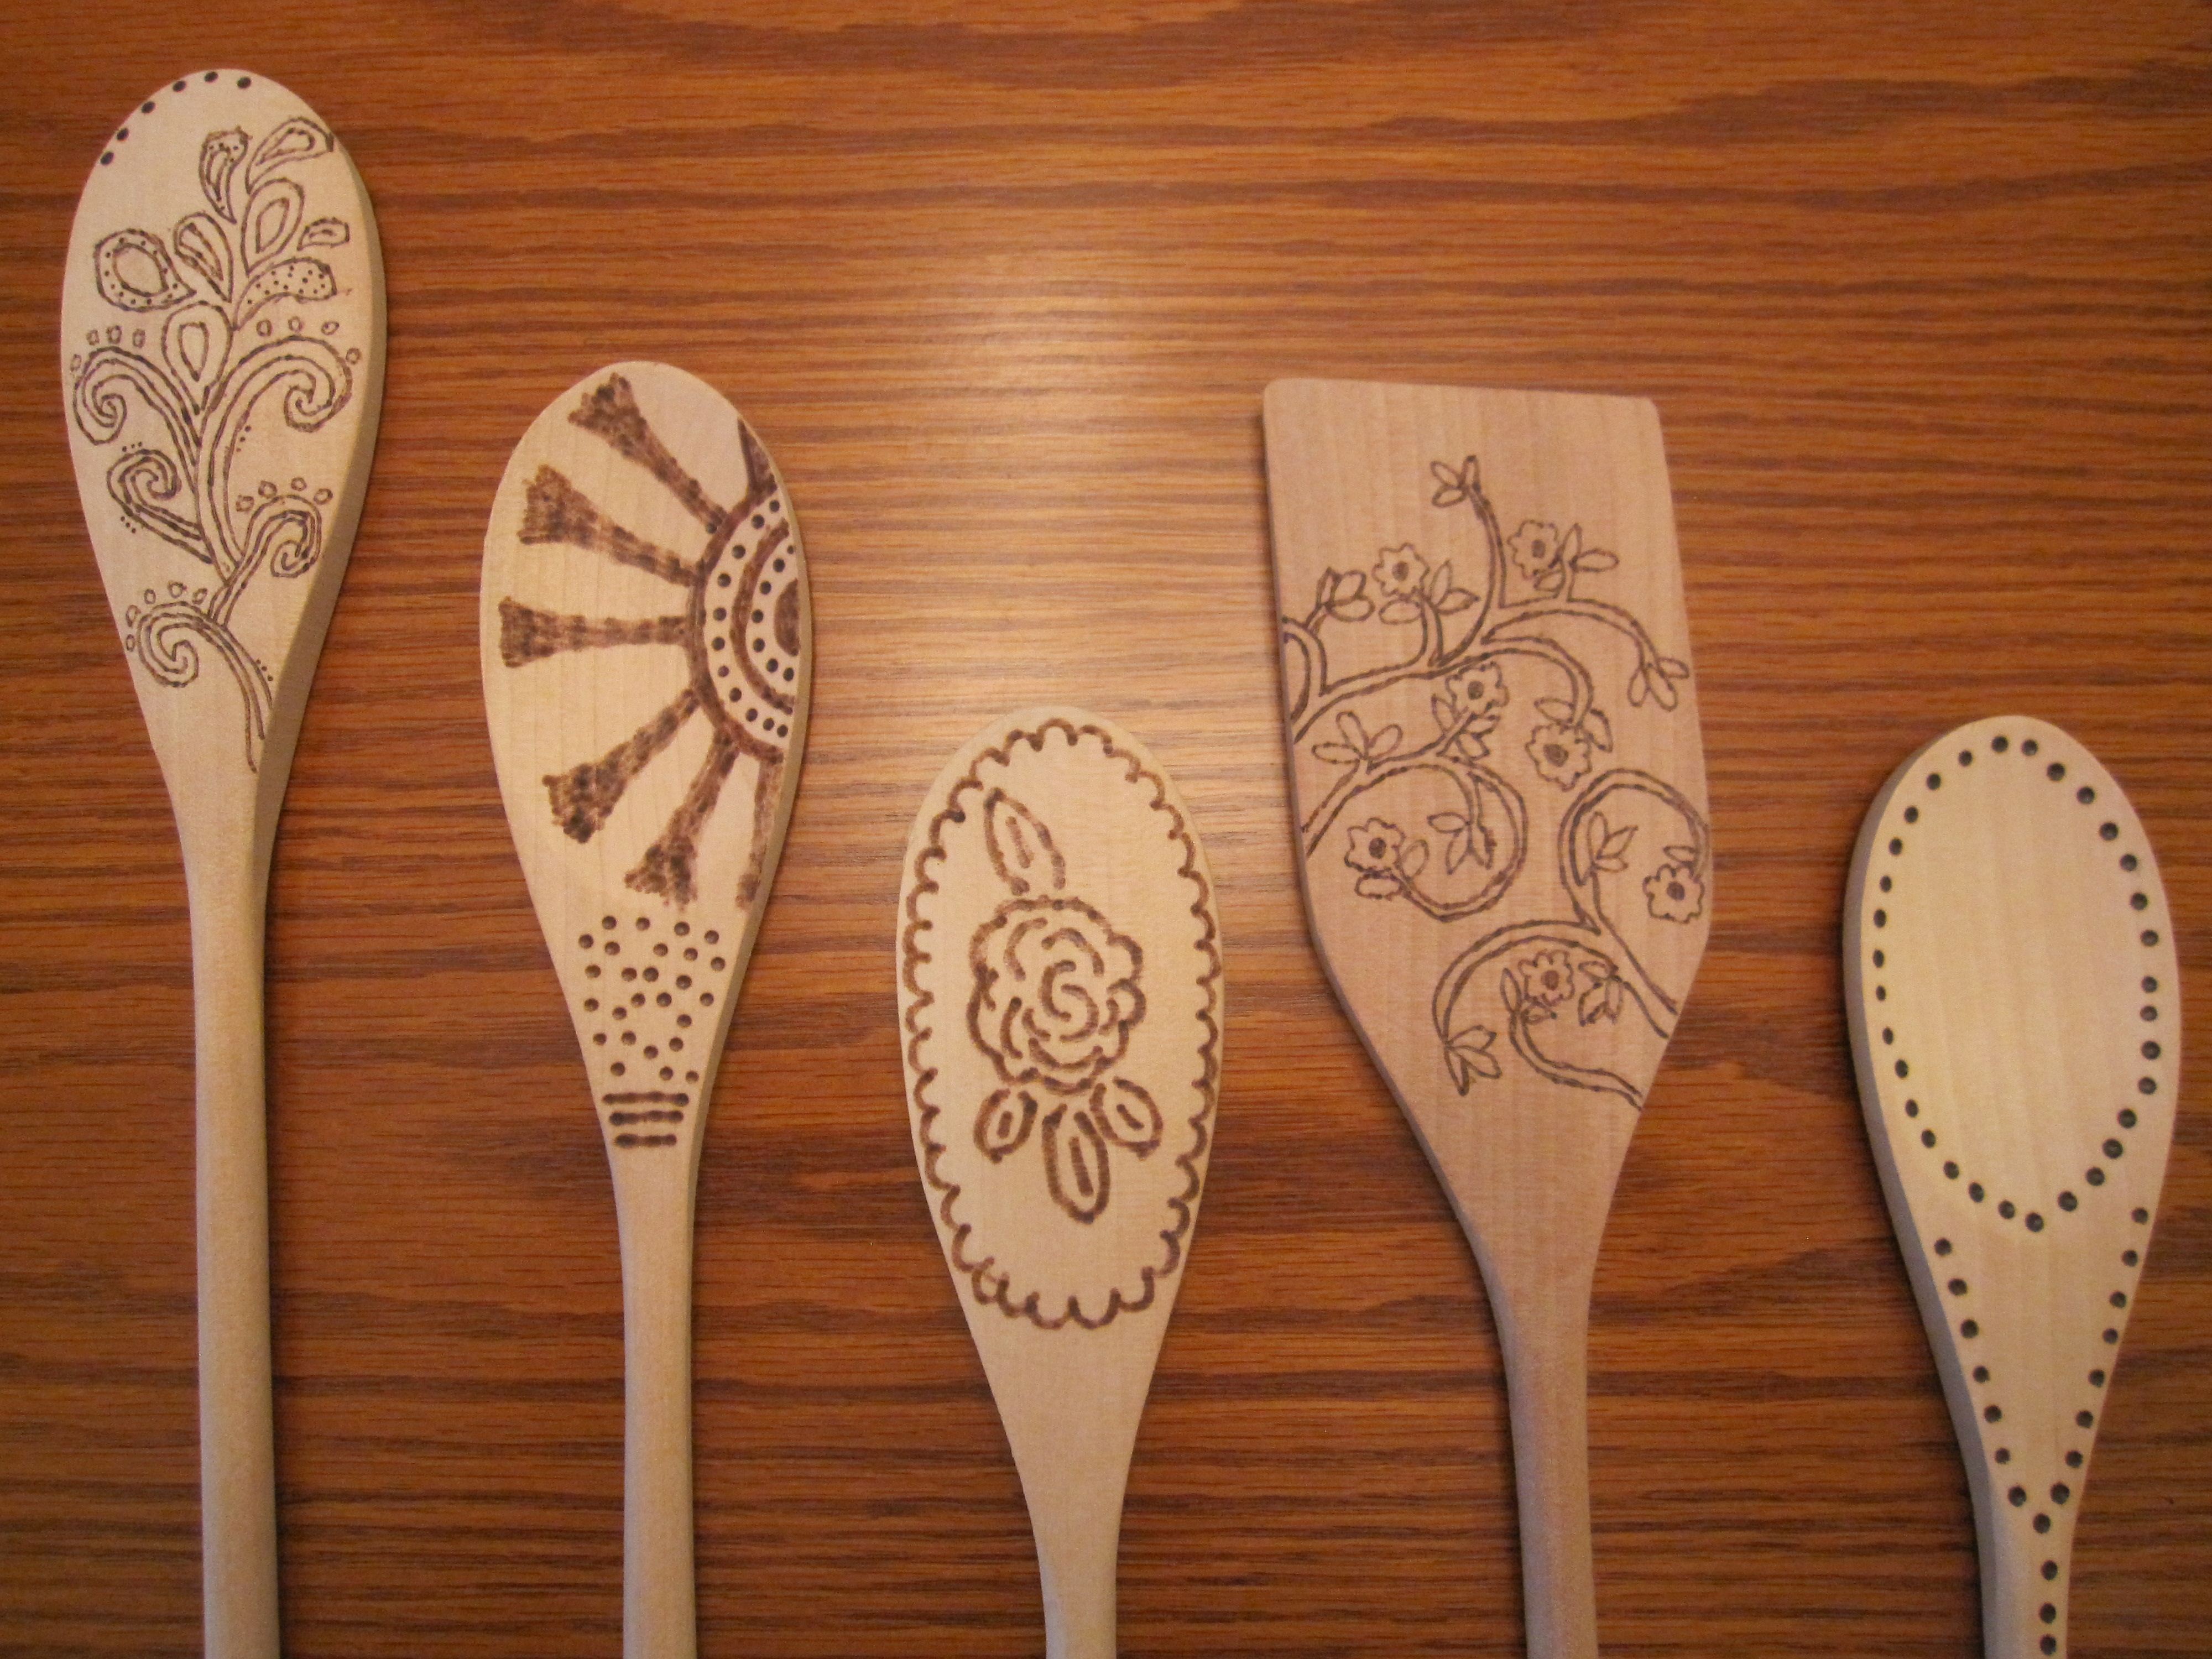 wood burning projects for beginners